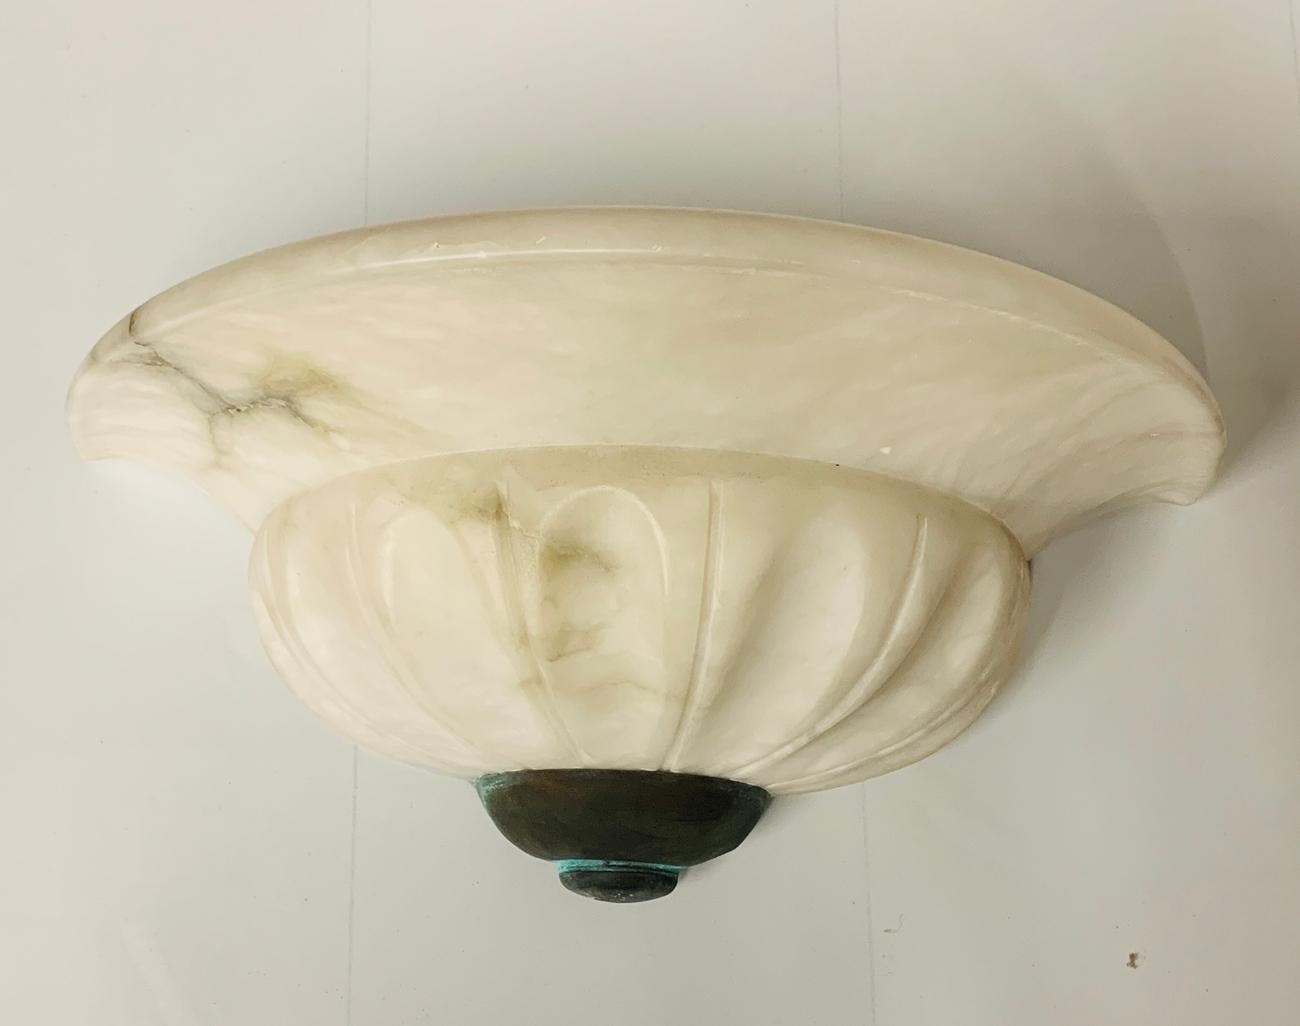 Vintage alabaster and bronze wall sconce made in Italy, in very good vintage condition.
Measurements:
13.50 inches wide x 6.25 inches high x 7 inches projection from wall.

Hardwired.